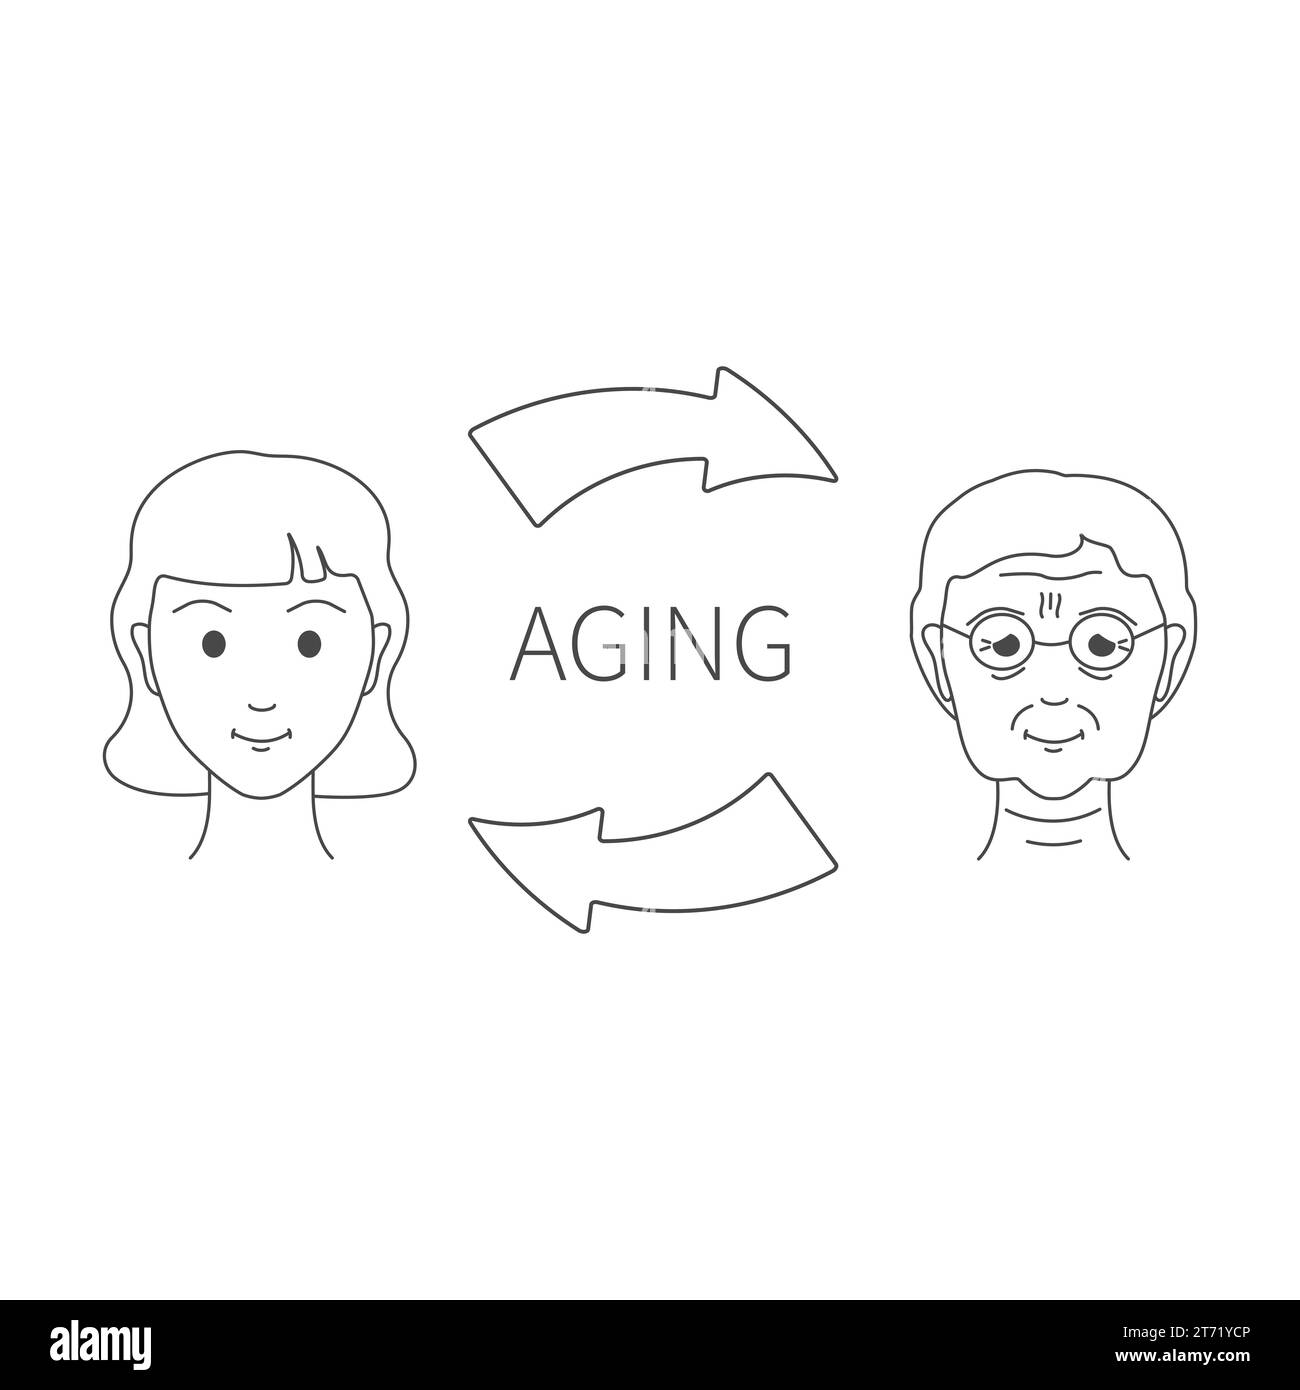 Anti-age facelift treatment result of botox injection illustration Stock Vector